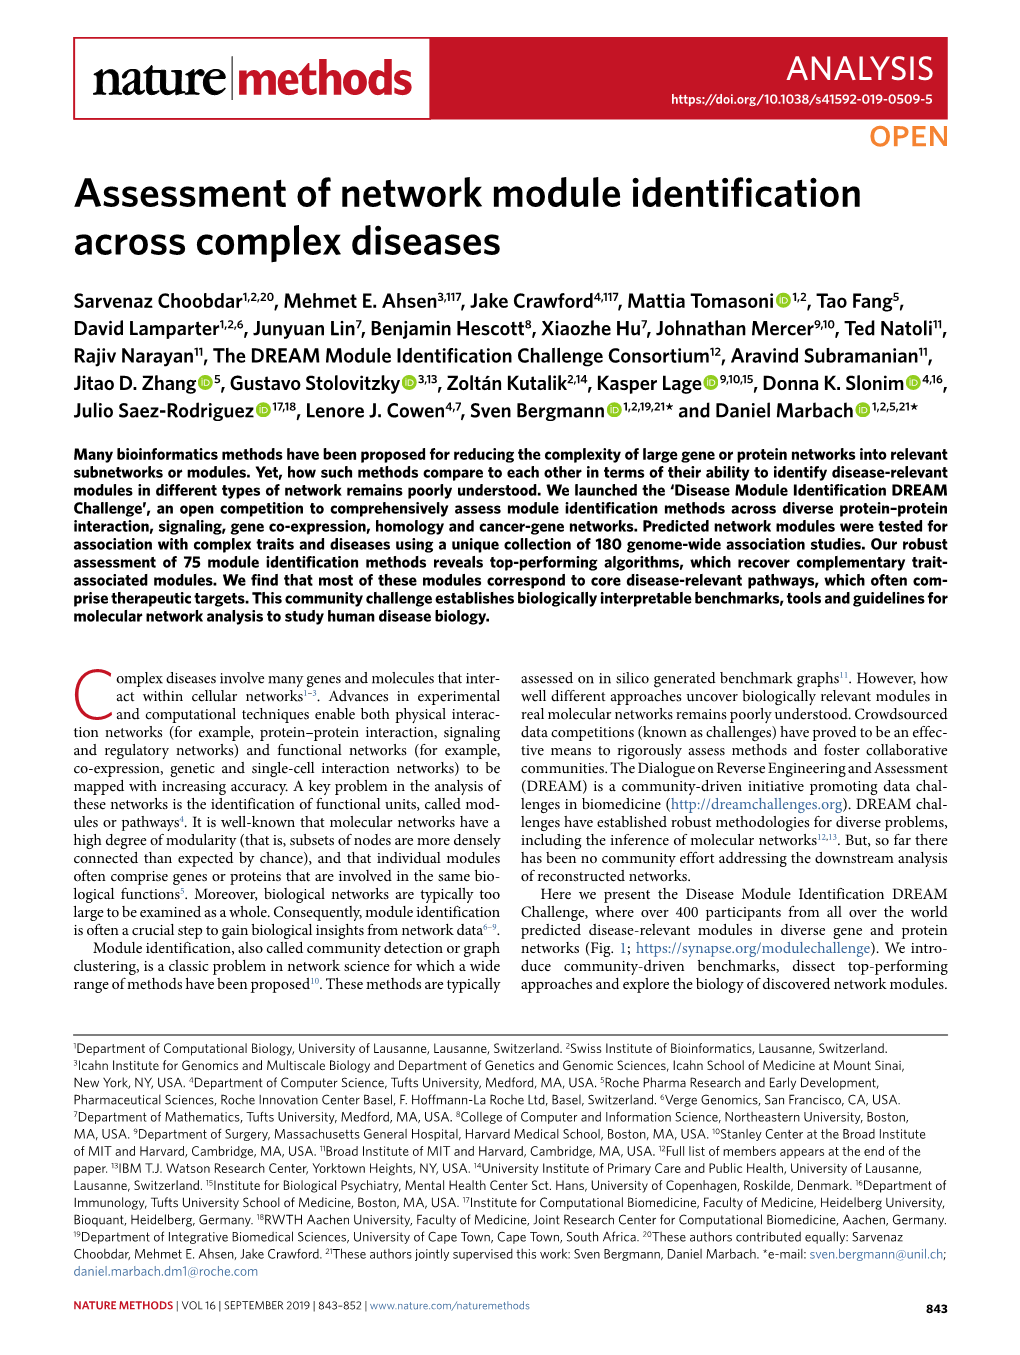 Assessment of Network Module Identification Across Complex Diseases